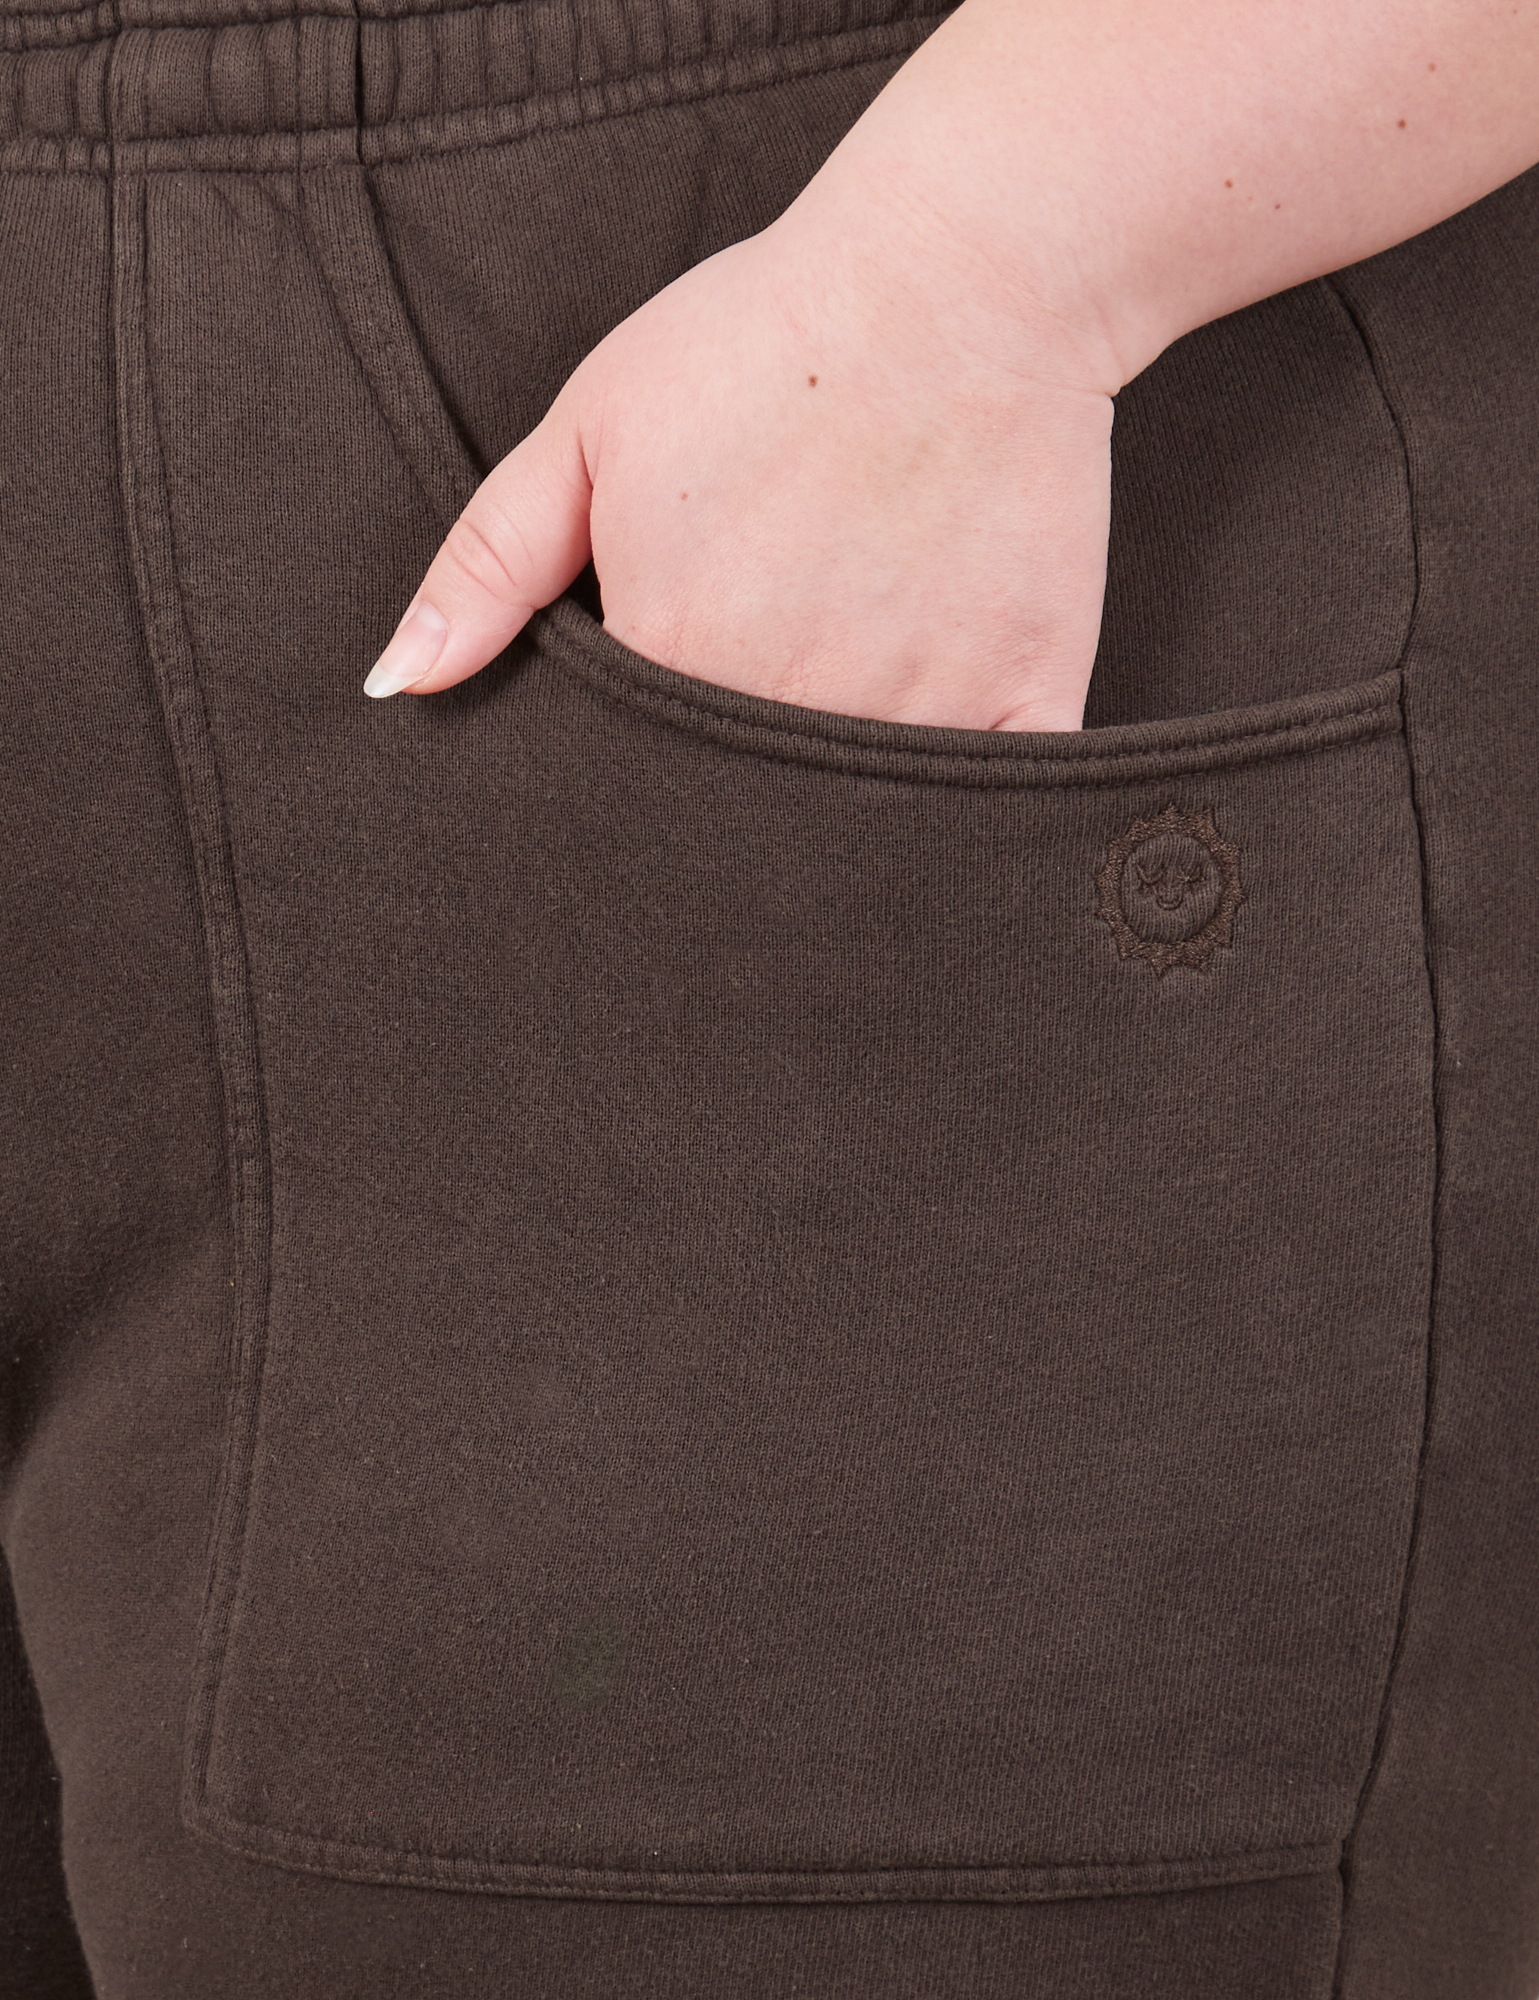 Cropped Rolled Cuff Sweatpants in Espresso Brown front pocket close up. Ashley has her hand in the pocket.